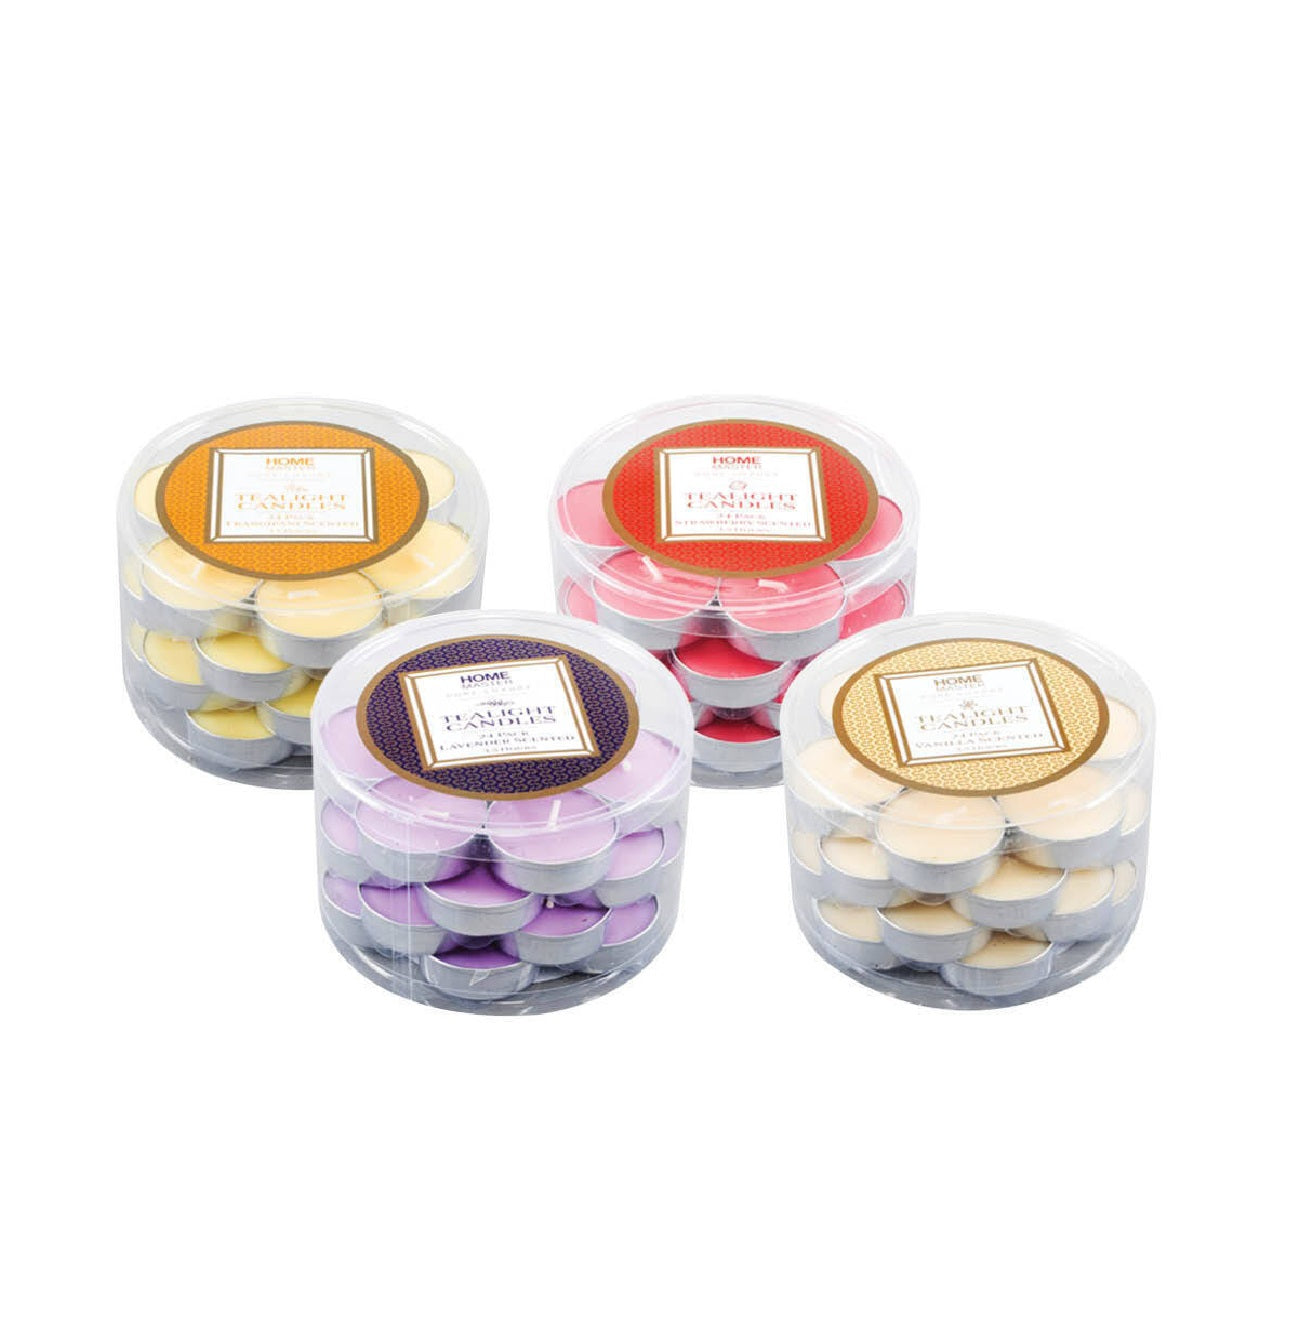 24pce Tealight Candles - Vanilla Scented